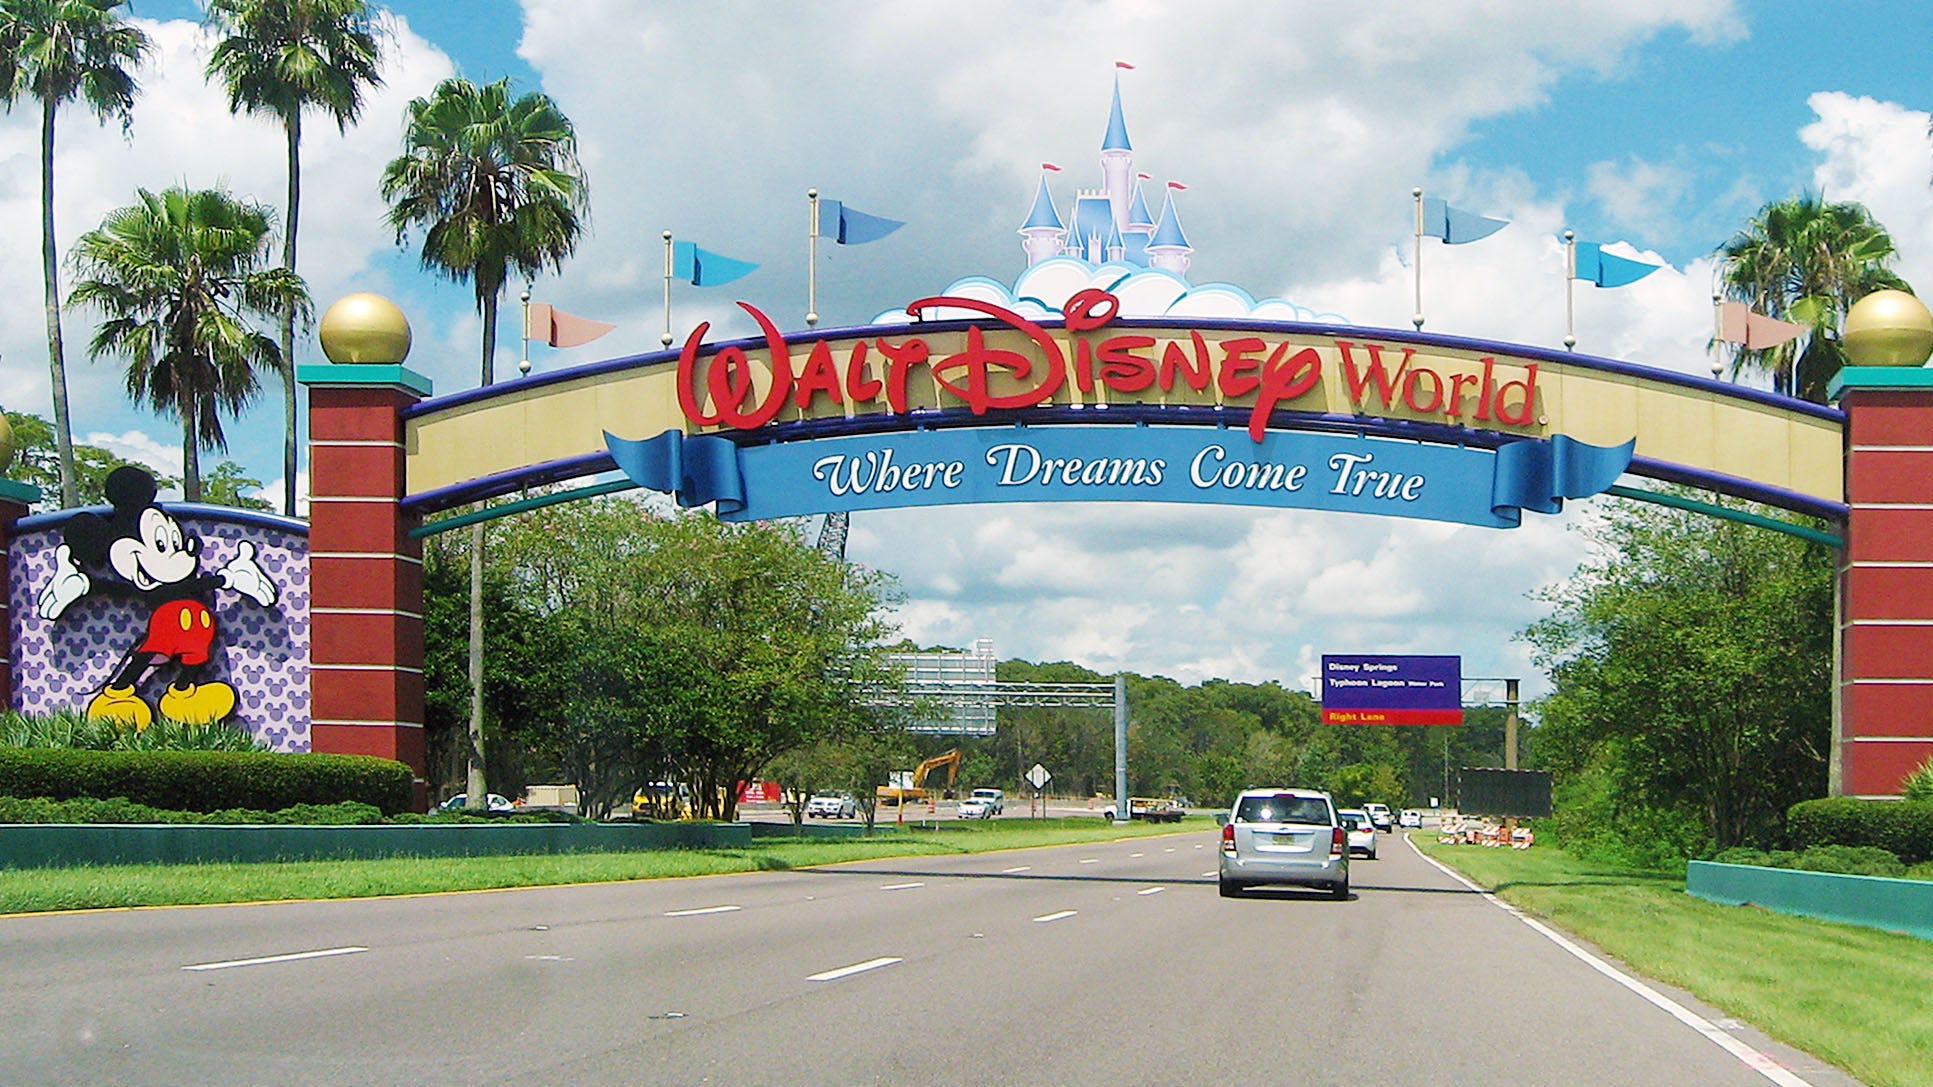 Disney World guest embarrasses fiancee with fake proposals all over the park